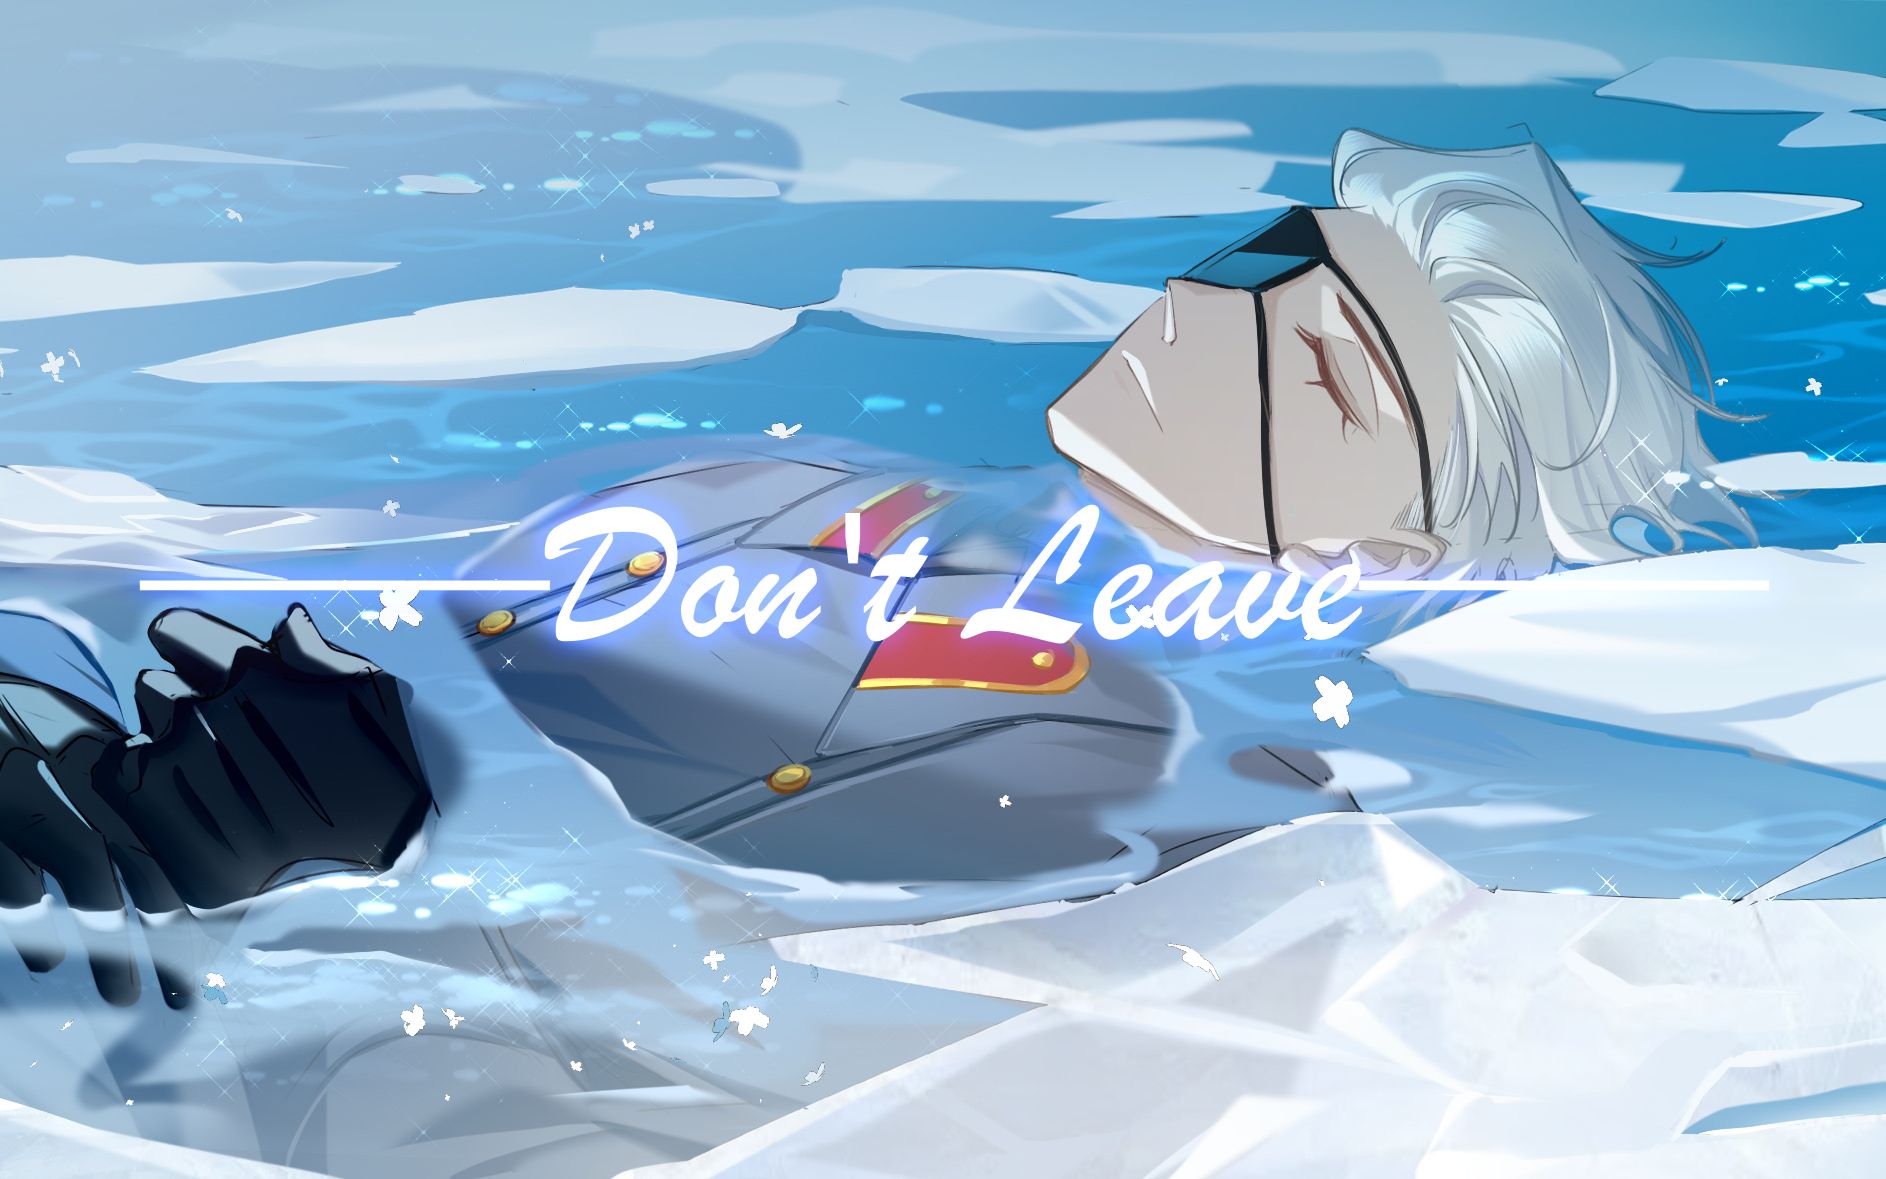 【ch/苏】Don't Leave